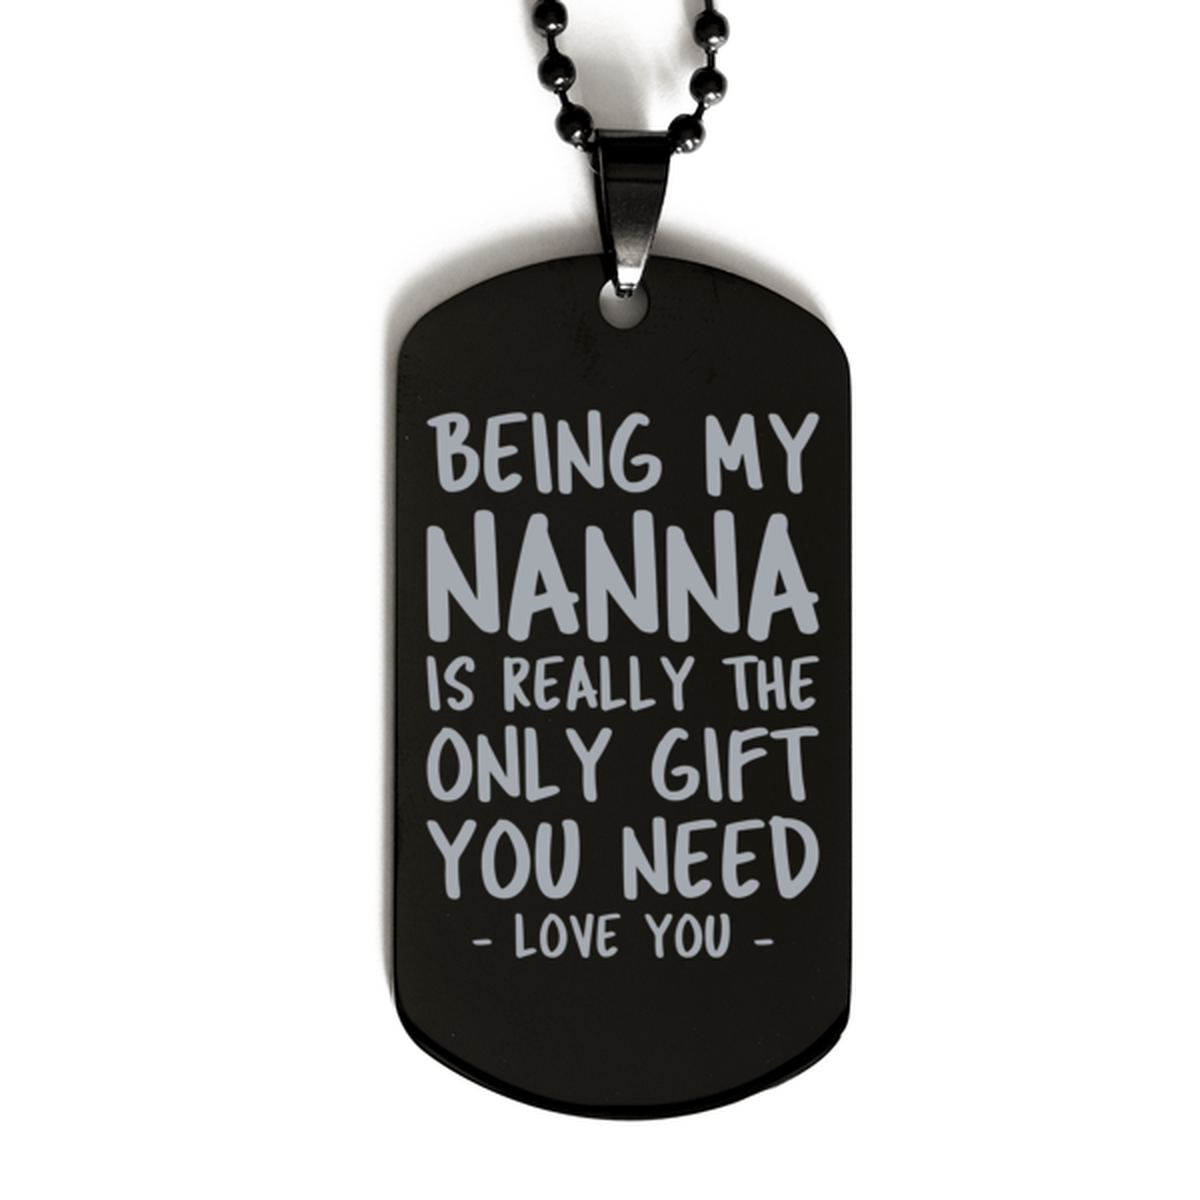 Funny Nanna Black Dog Tag Necklace, Being My Nanna Is Really the Only Gift You Need, Best Birthday Gifts for Nanna